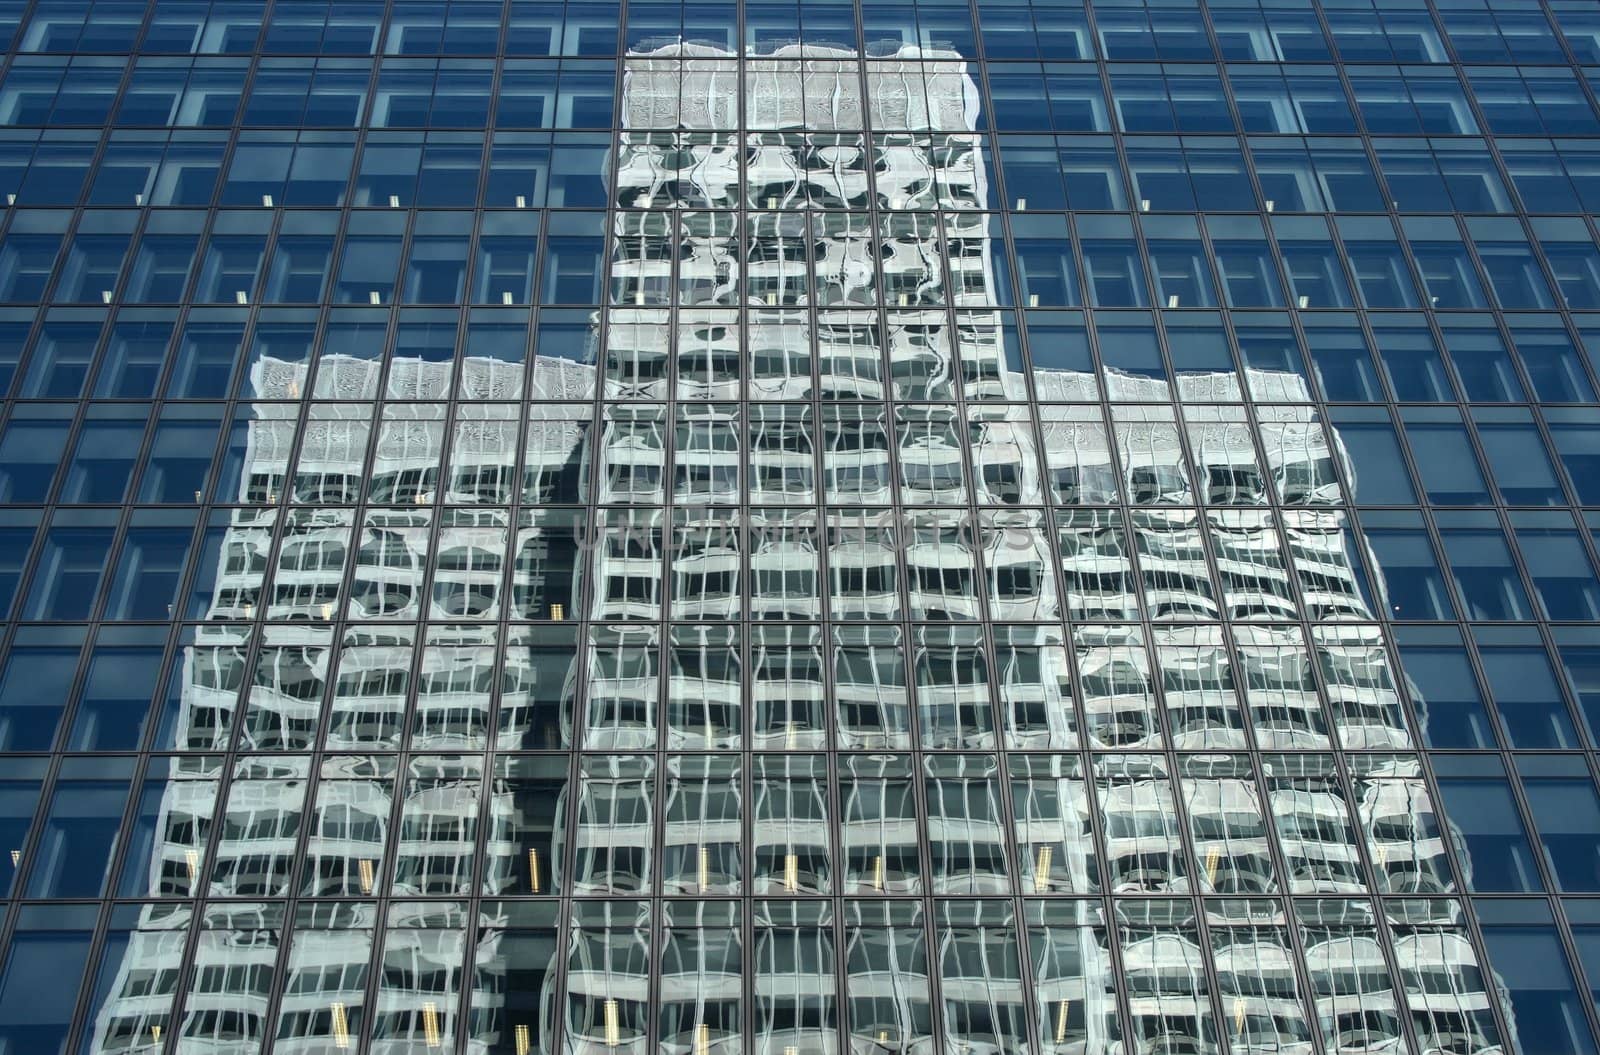 Skyscraper reflecting a white symmetrical office building.